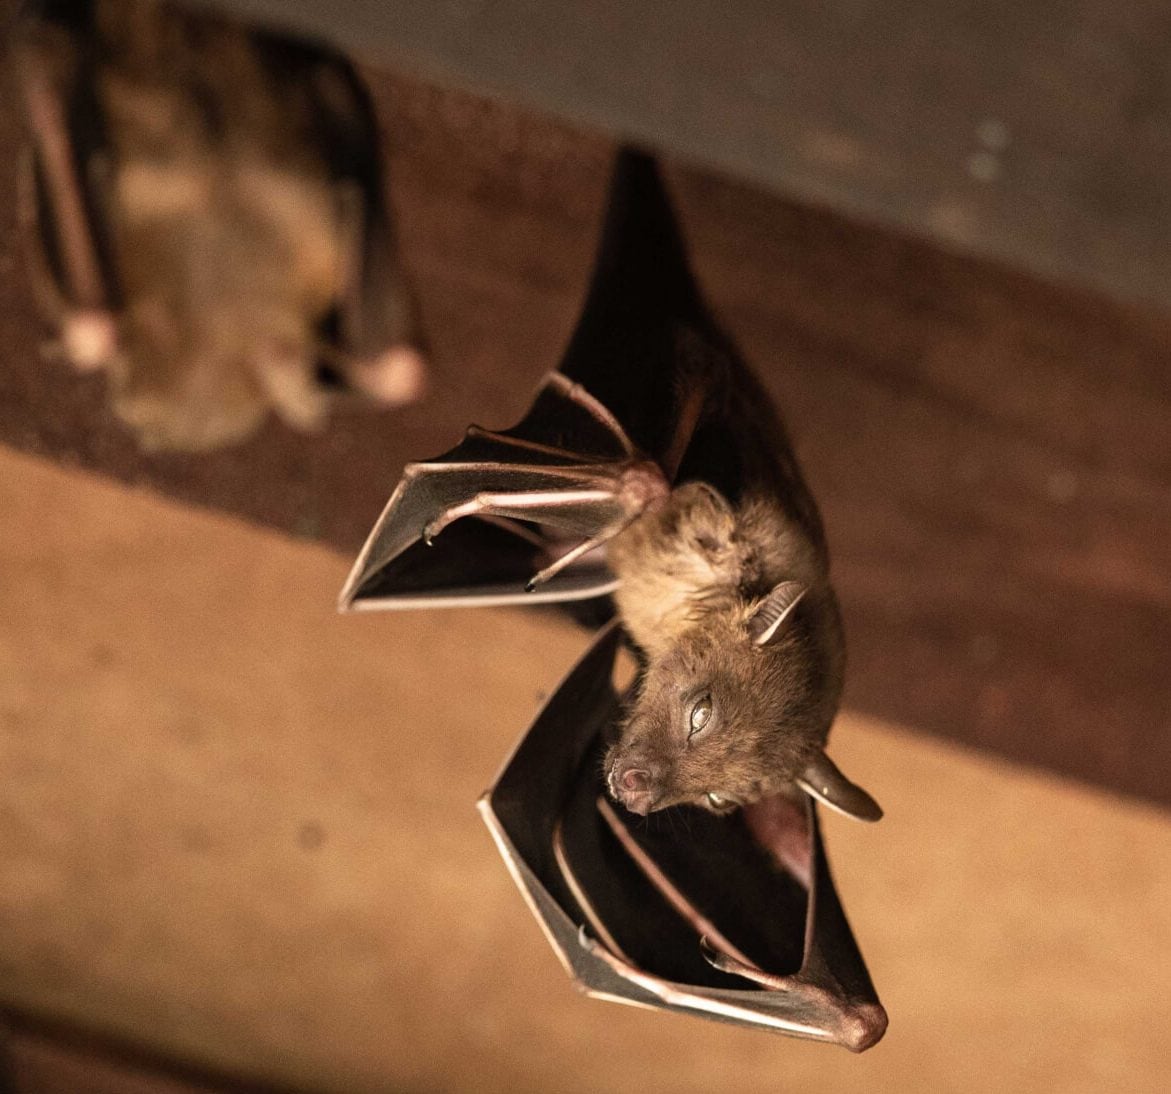 Expert bat removal services for a safe and humane solution in Roanoke